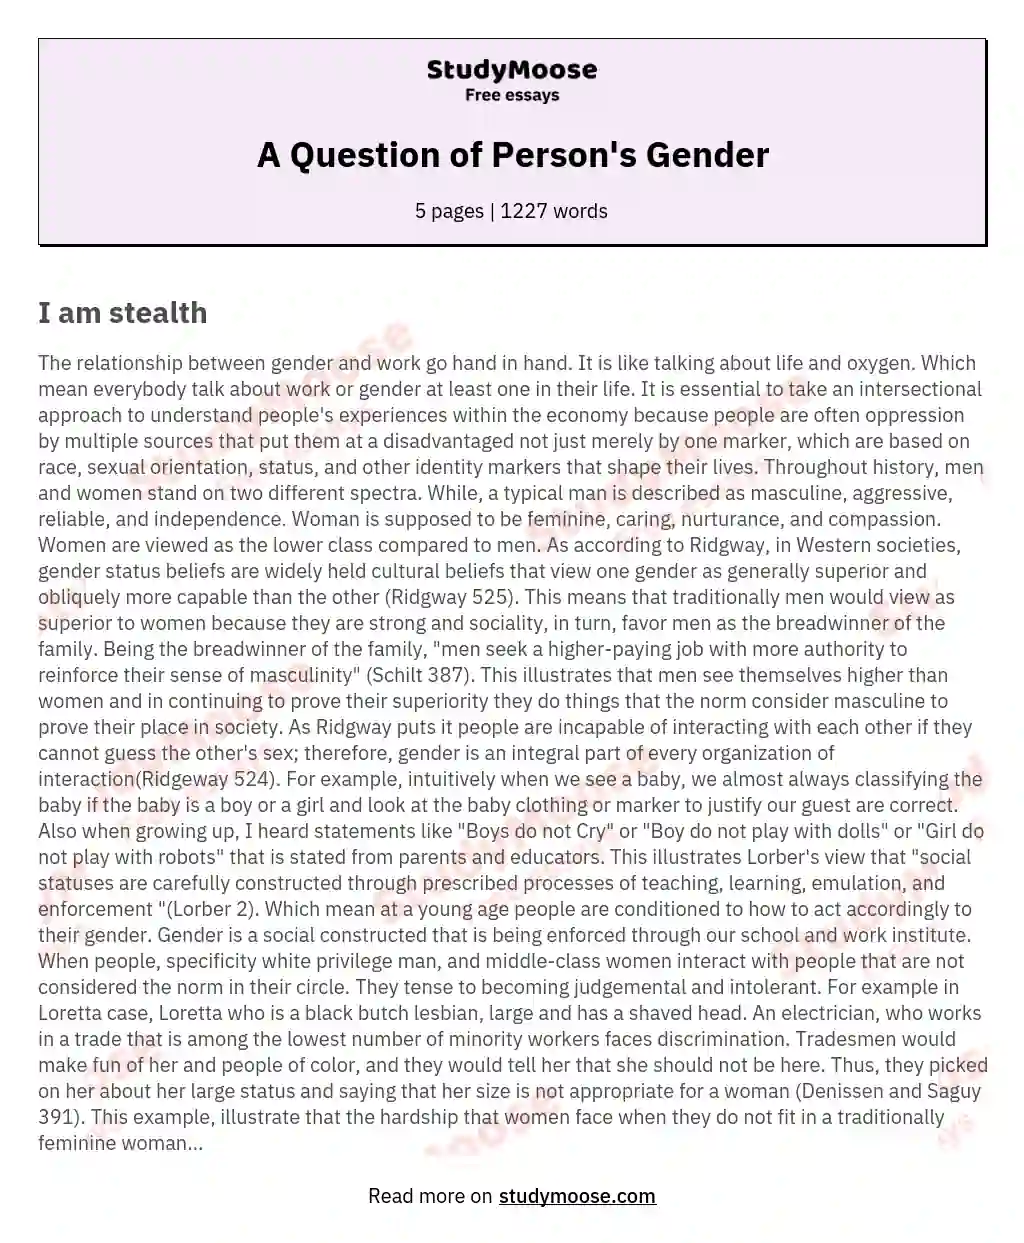 A Question of Person's Gender essay